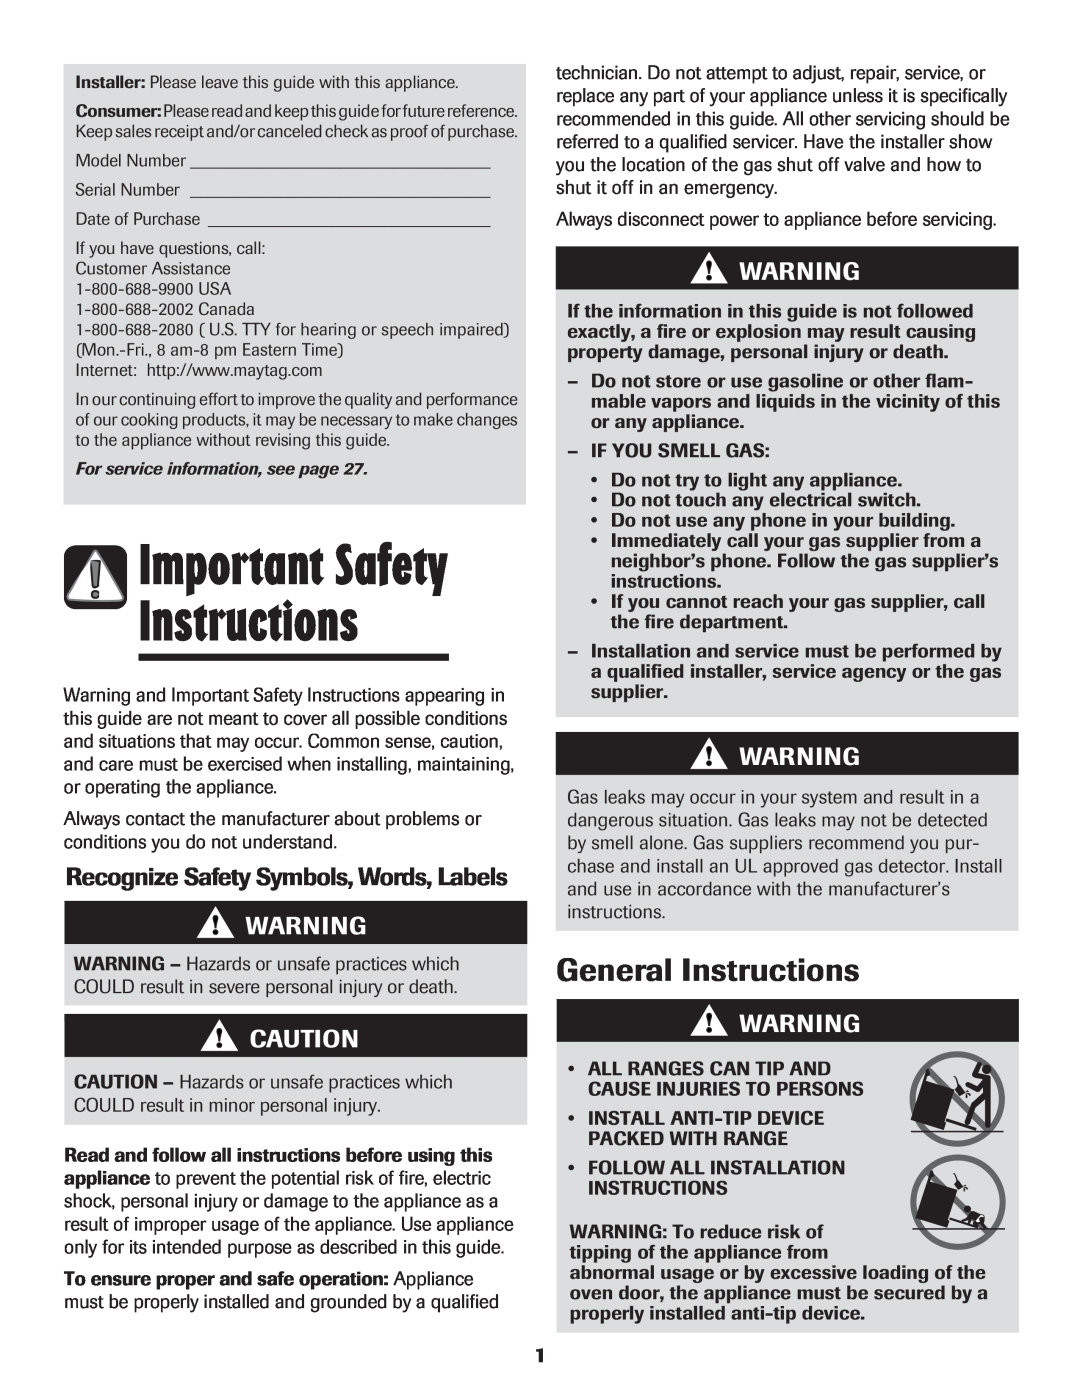 Maytag MGR5775QDW manual Important Safety, General Instructions, Recognize Safety Symbols, Words, Labels 